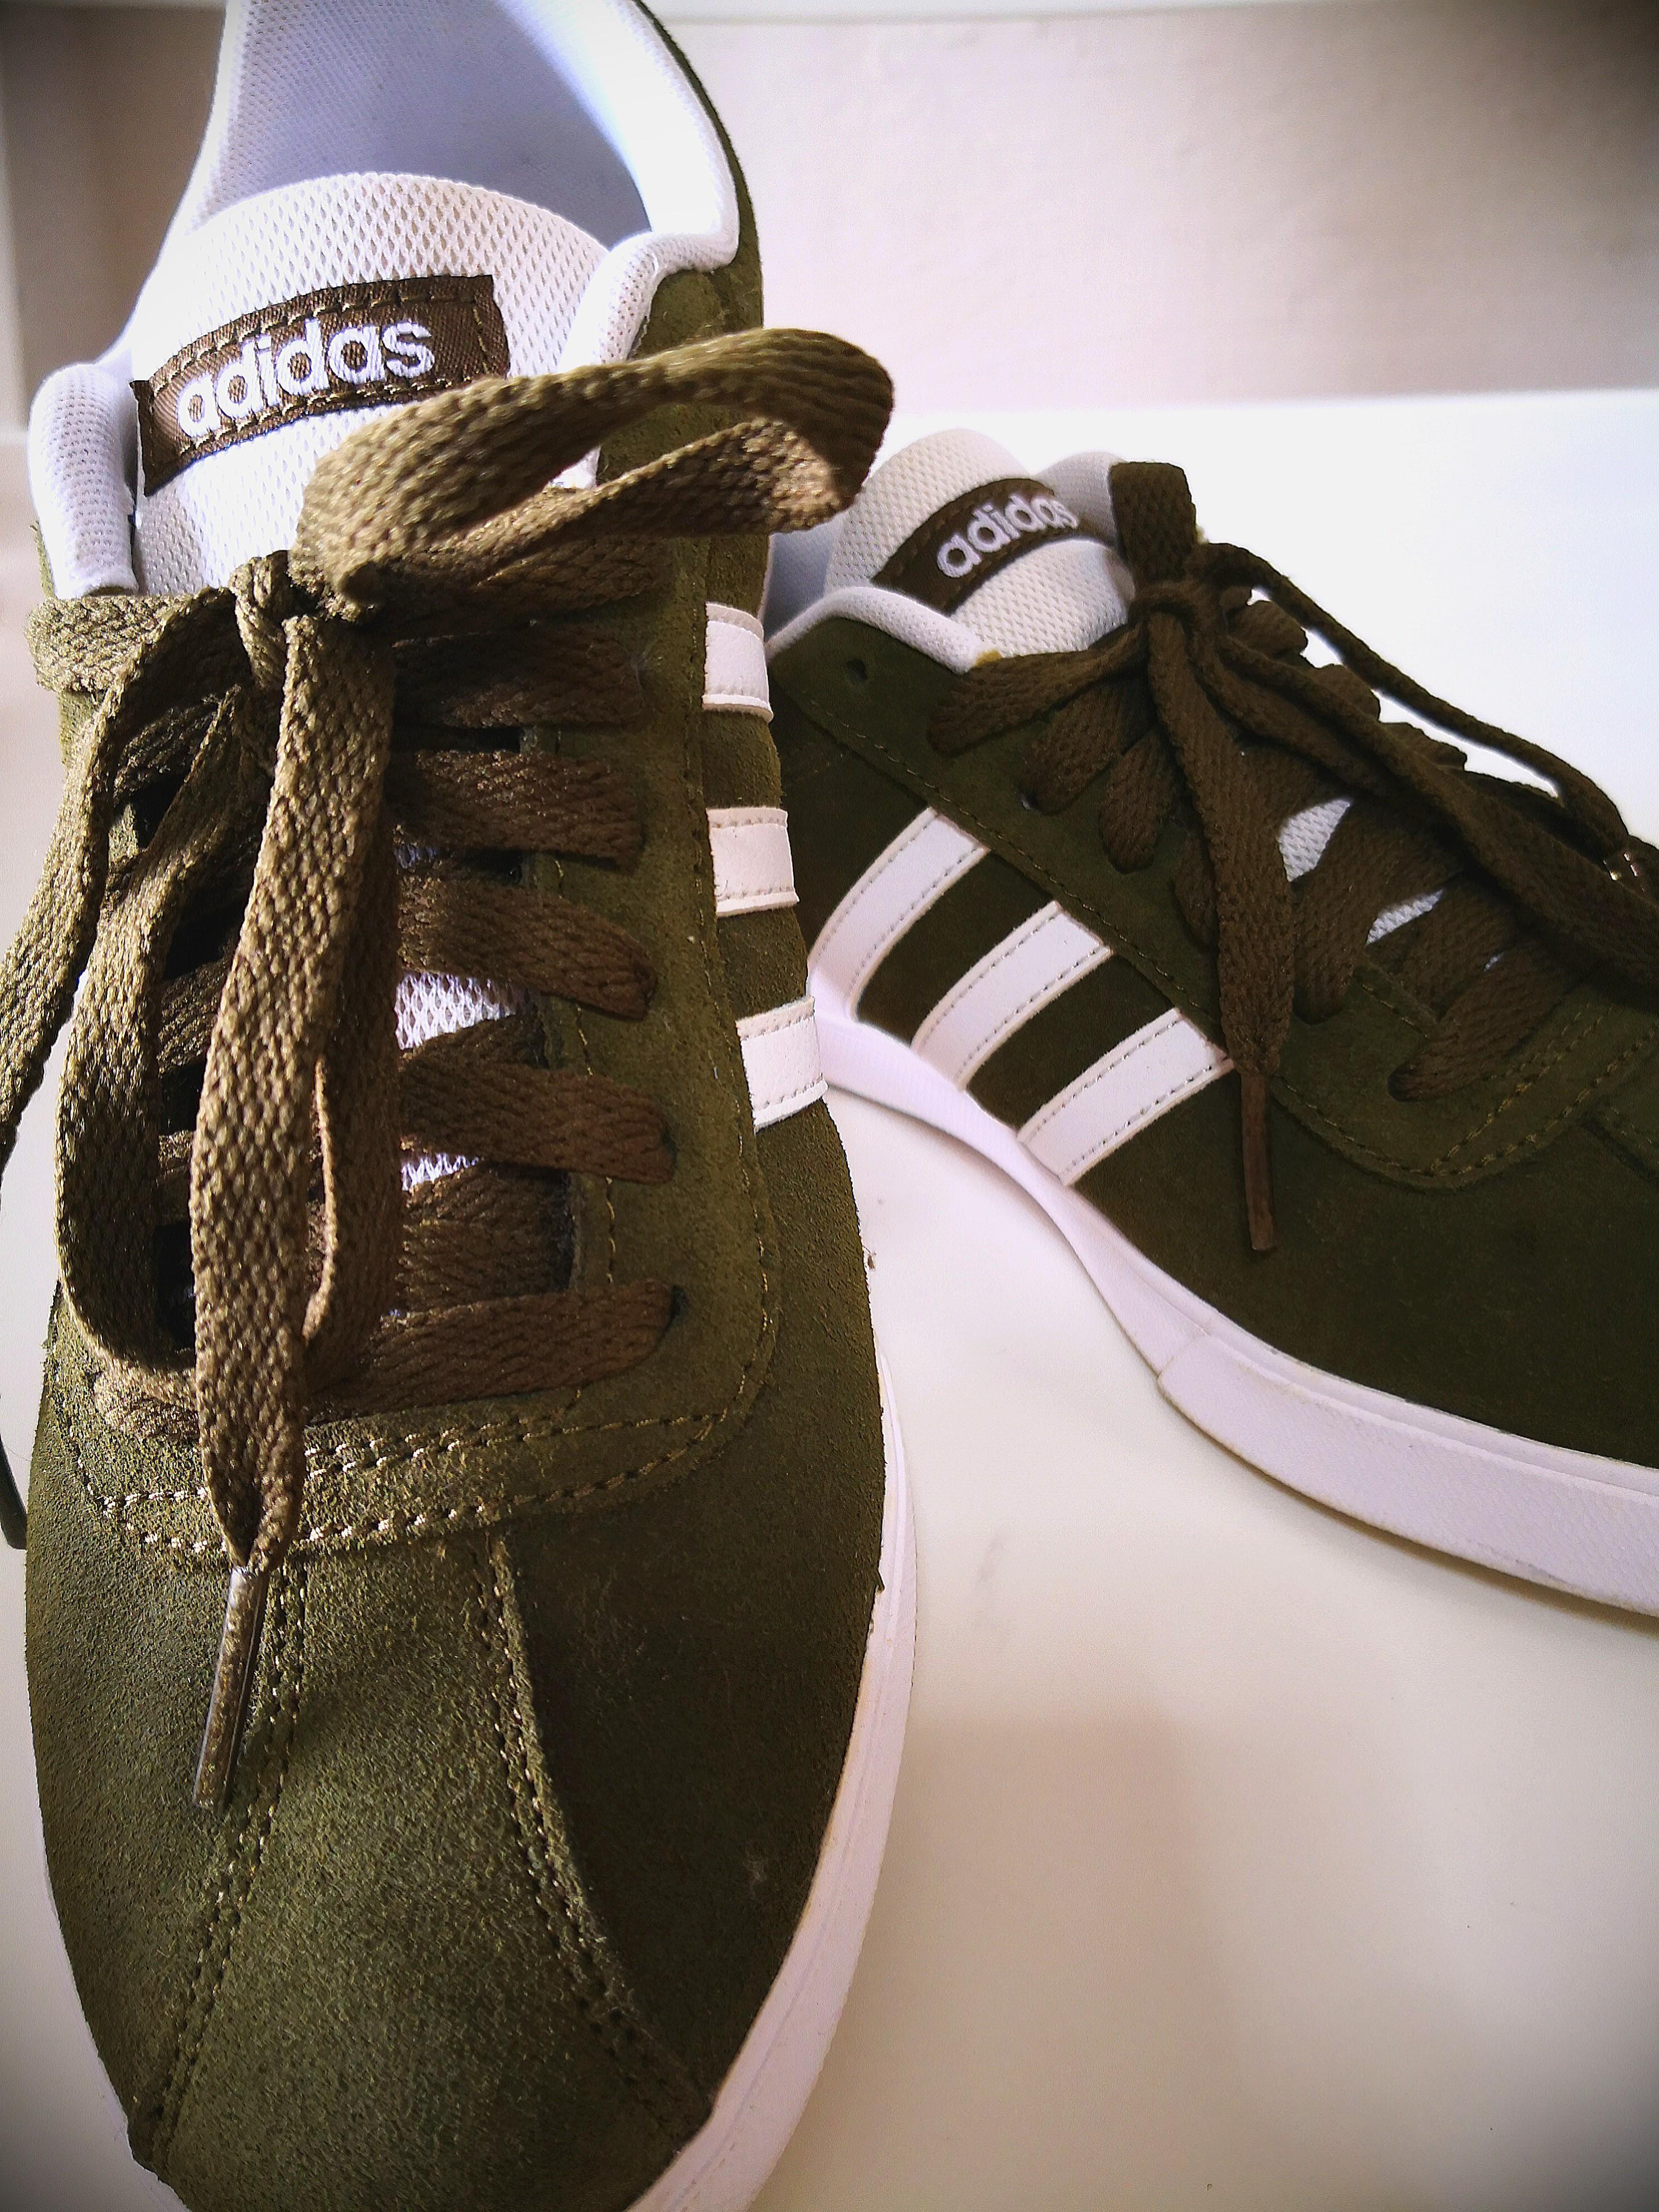 Adidas Sneakers Olive Green, Women's 